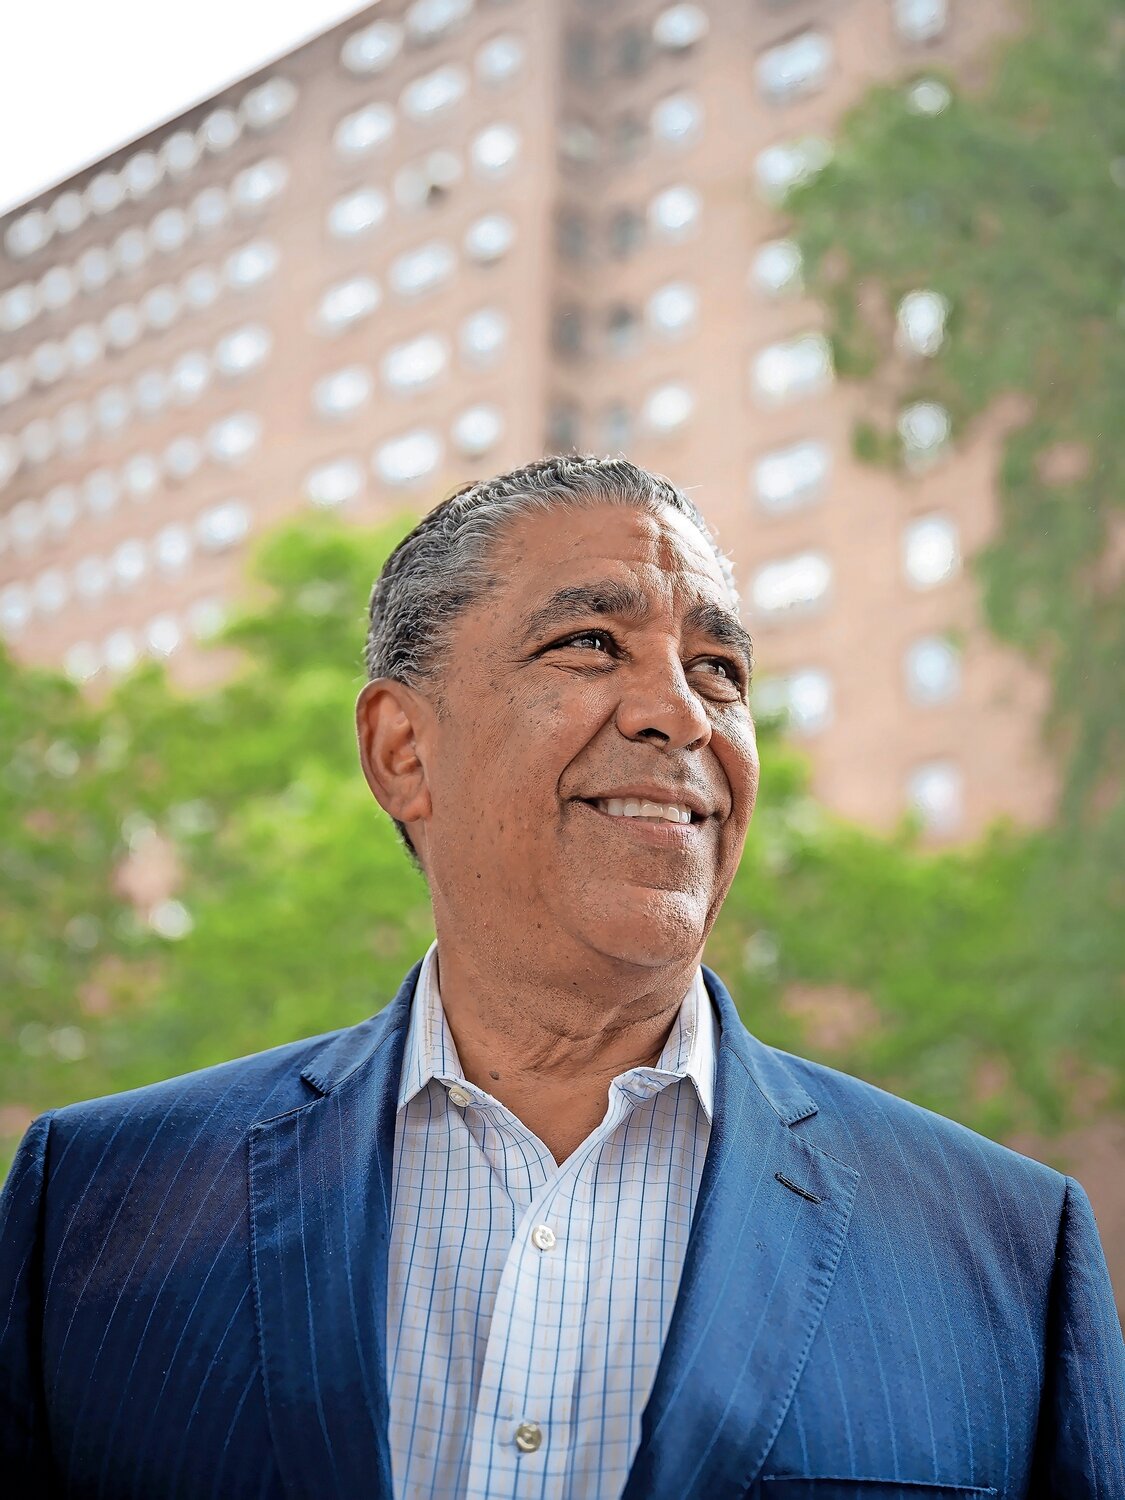 U.S. Representative Adriano Espaillat hosted an ethnic roundtable that featured the Dominican Republic president Luis Abinader.